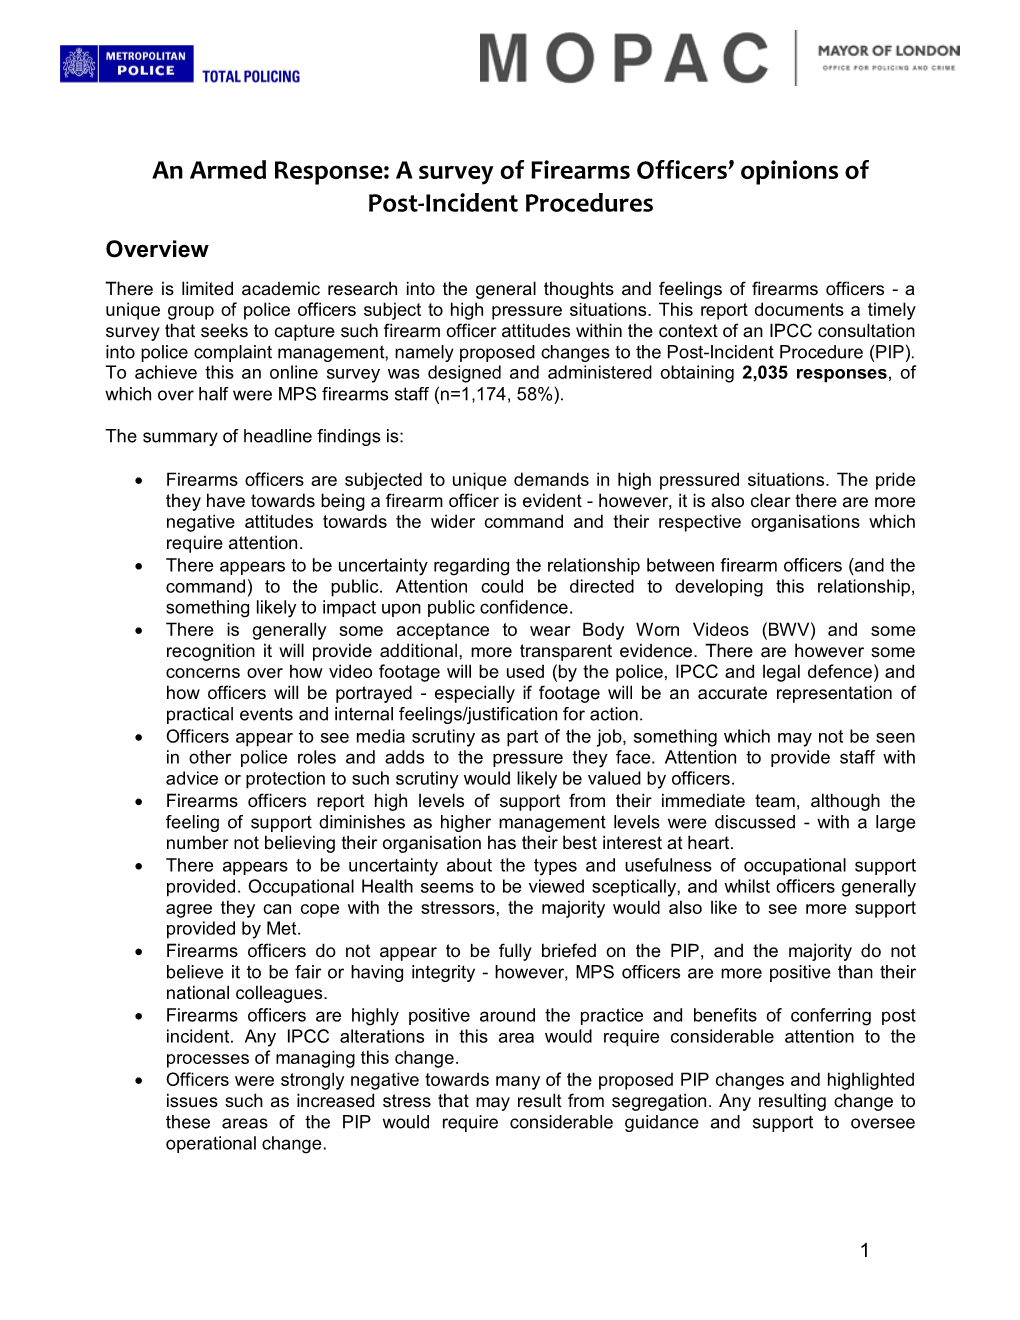 An Armed Response: a Survey of Firearms Officers' Opinions of Post